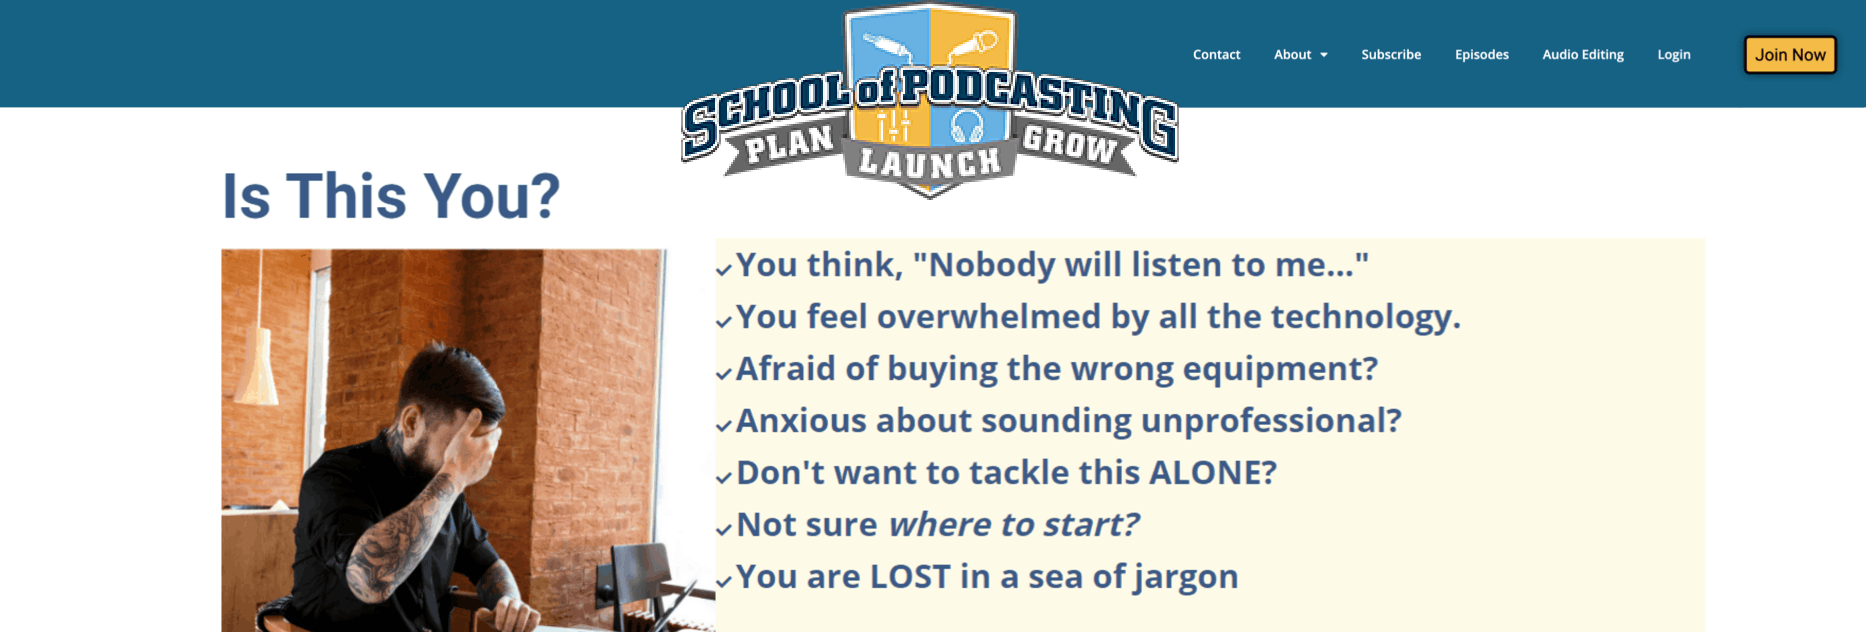 School of Podcasting homepage with image of frustrated person and black text beside it